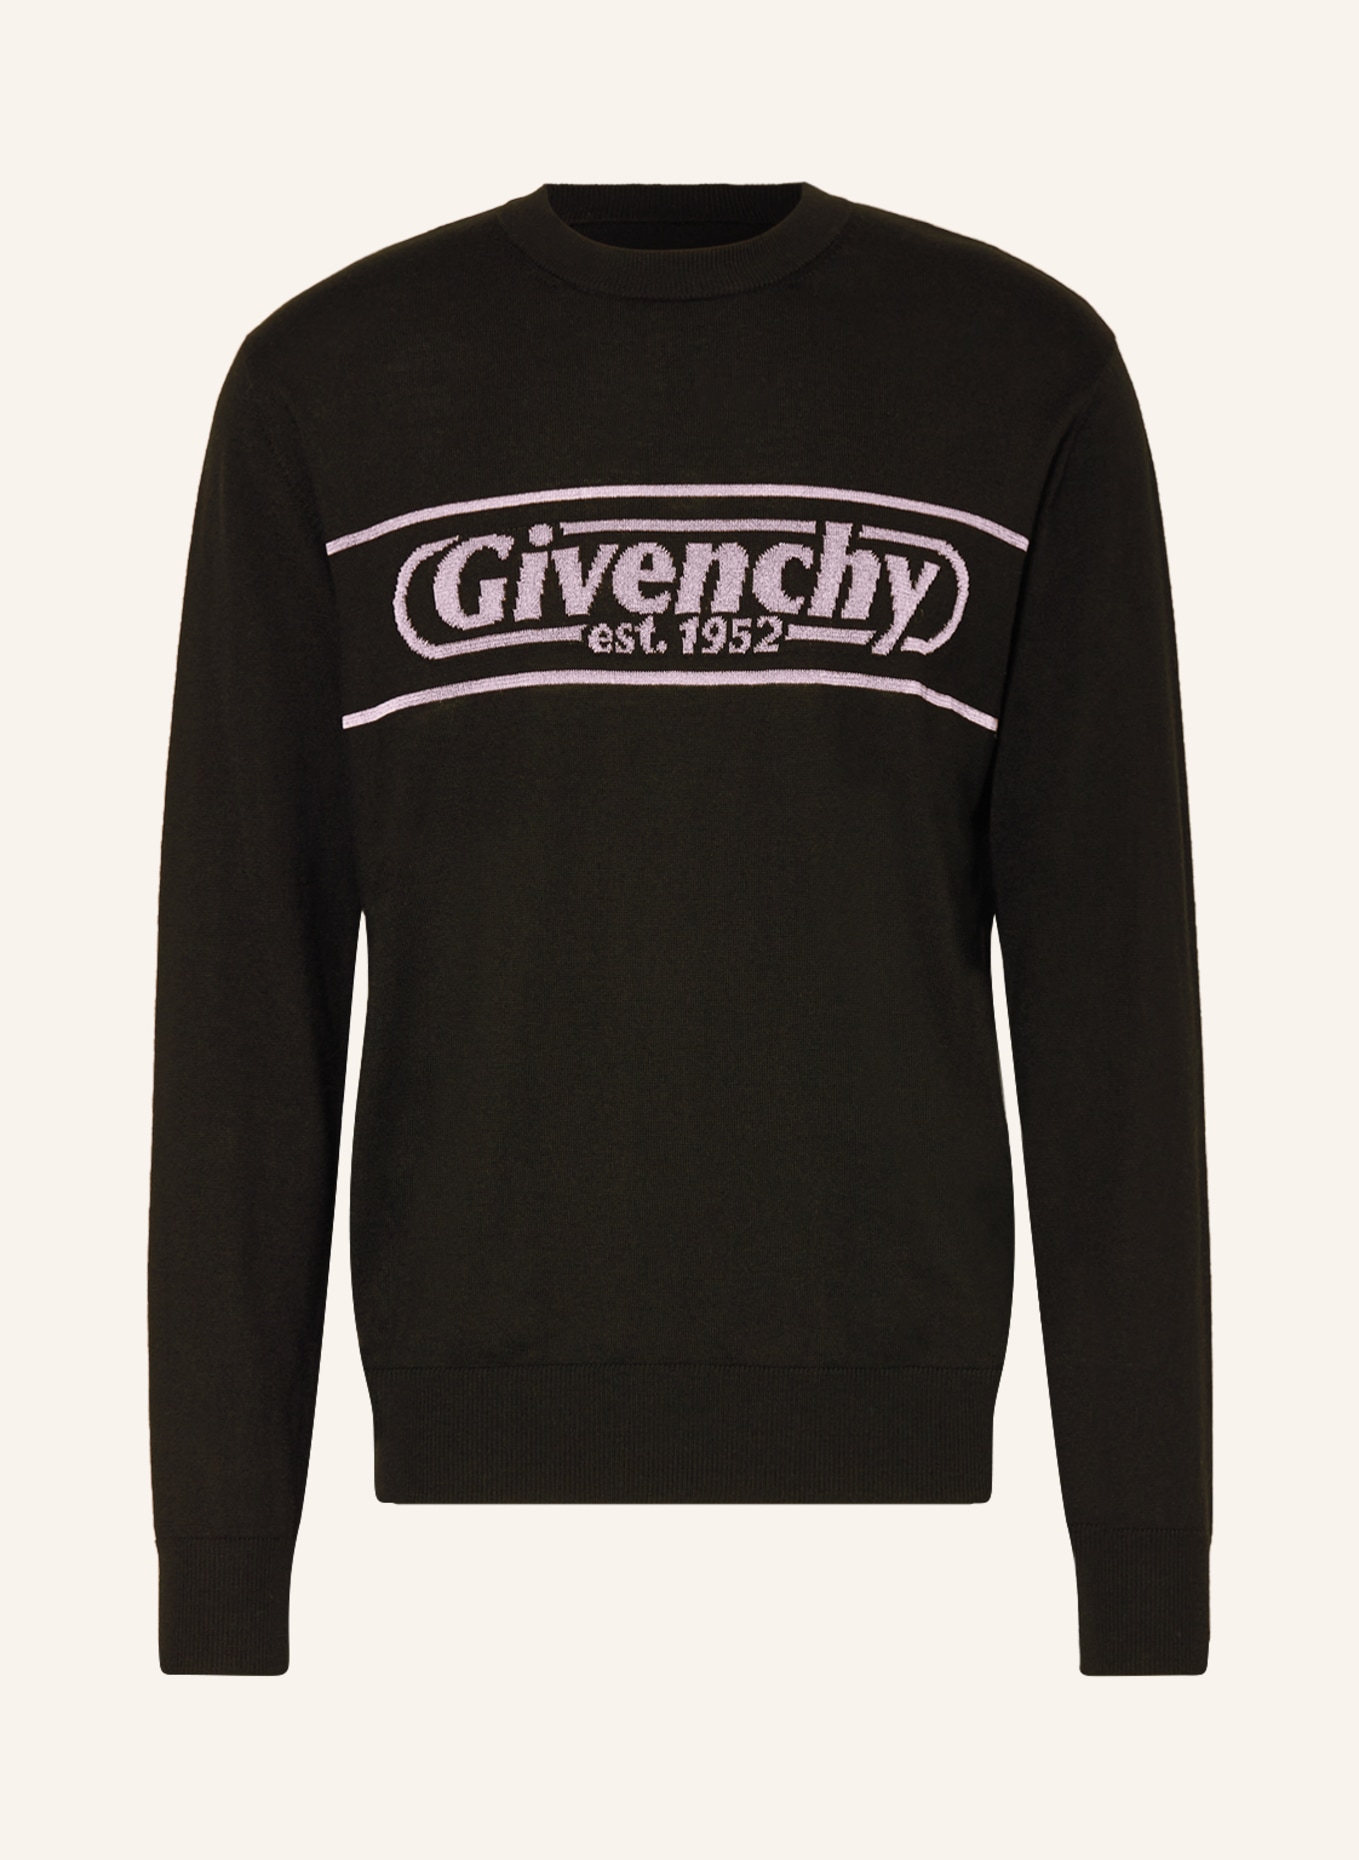 GIVENCHY Sweater in black